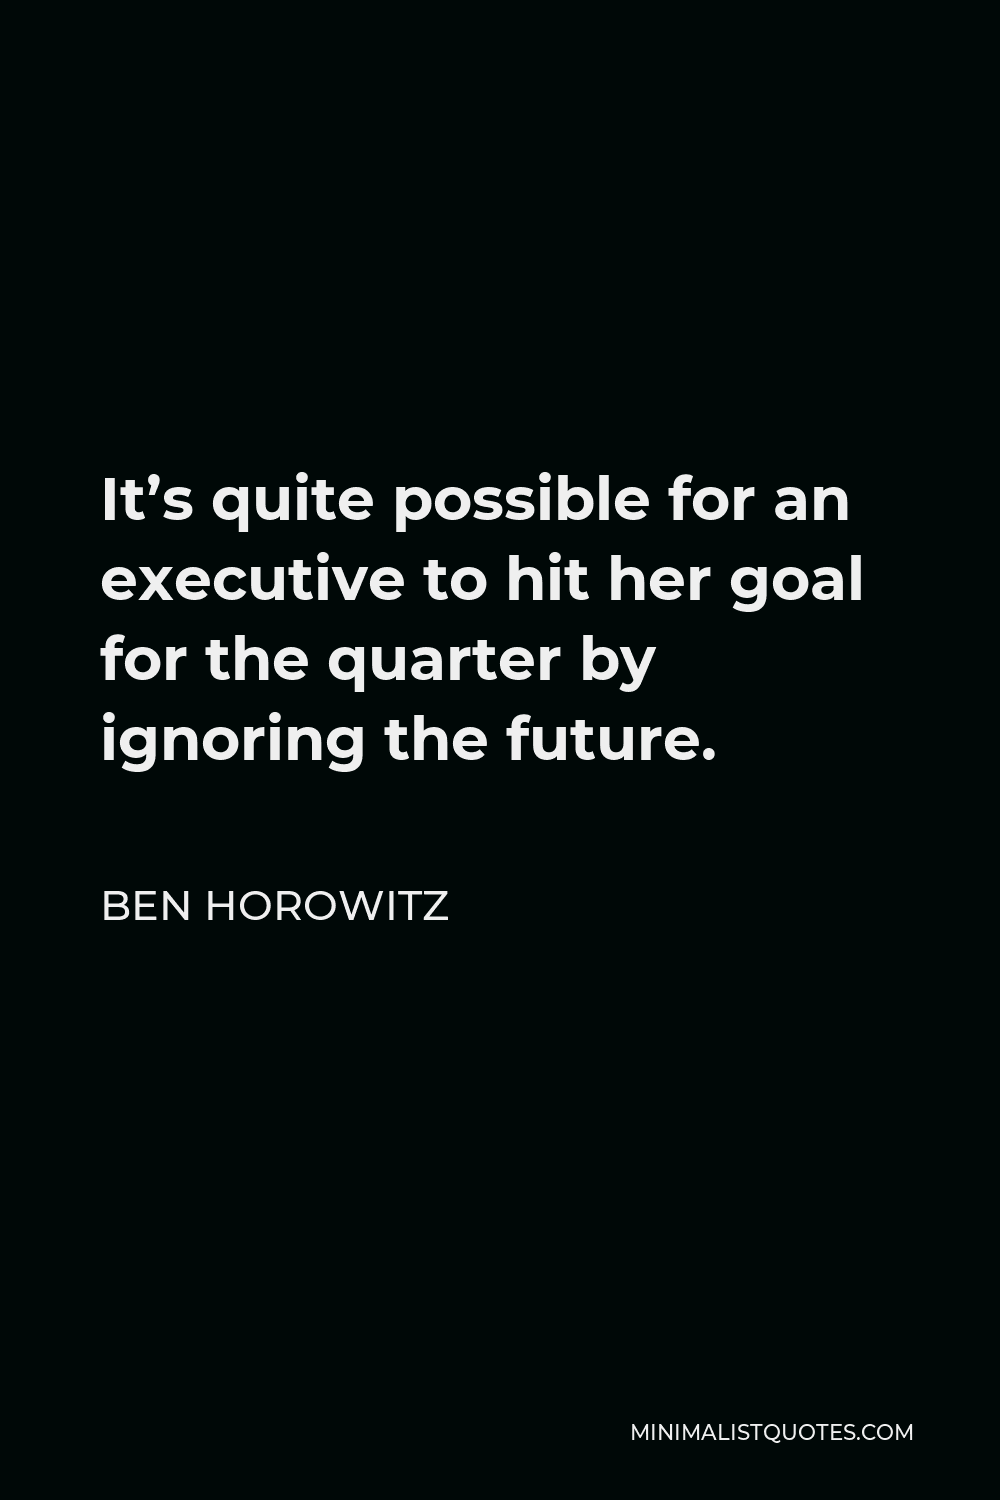 Ben Horowitz Quote - It’s quite possible for an executive to hit her goal for the quarter by ignoring the future.